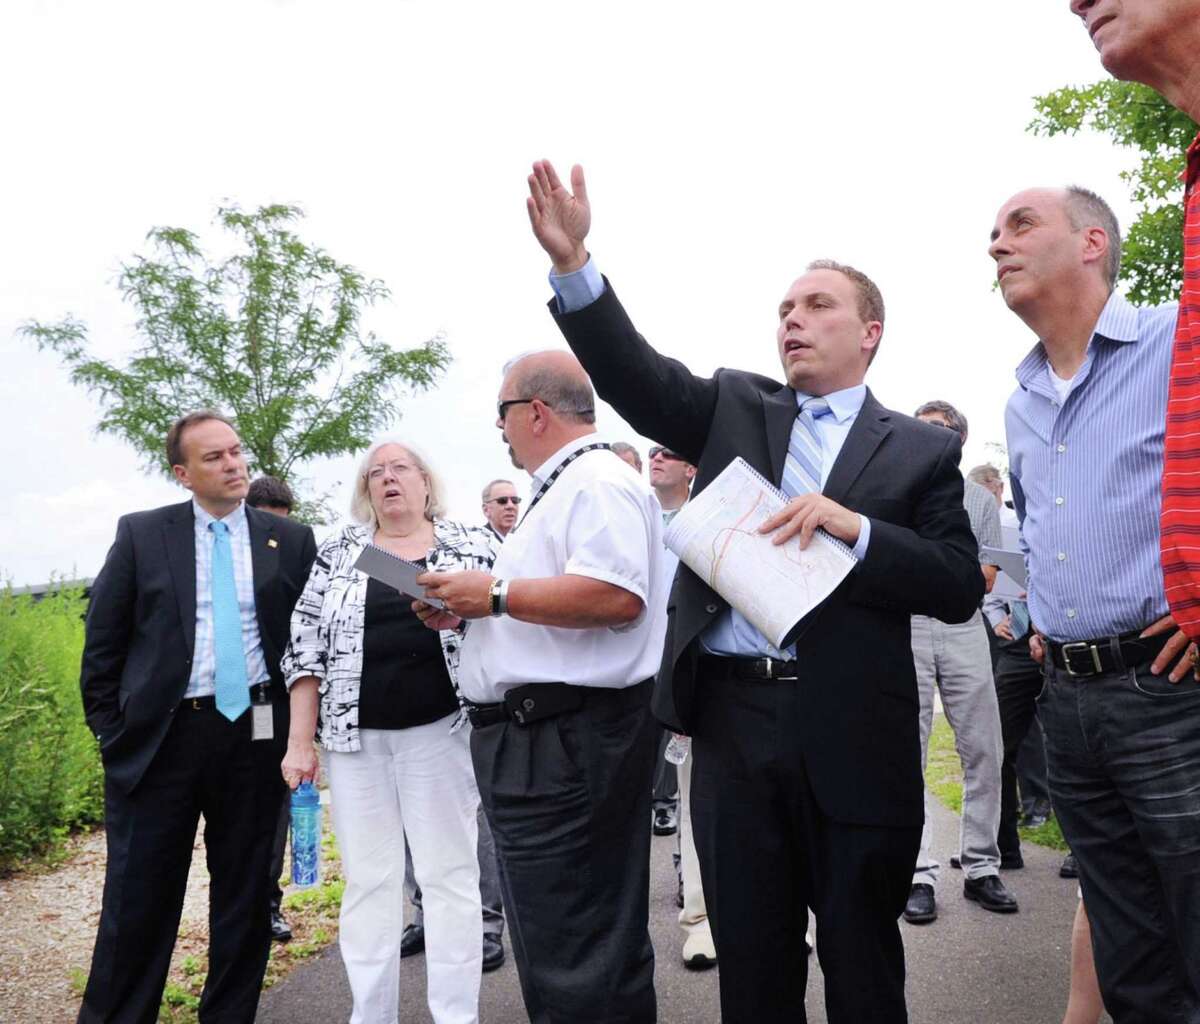 Second from right, Jason Cabral of the firm Burns & McDonnell, an engineering, architecture, and construction firm, leads the Connecticut Siting Council tour of Cos Cob Park in Greenwich, Conn., Thursday, July 13, 2017. At left is Greenwich First Selectman Peter Tesei. The siting council was in town to check out proposed routes for a new substation linked from Railroad Avenue to Cos Cob.